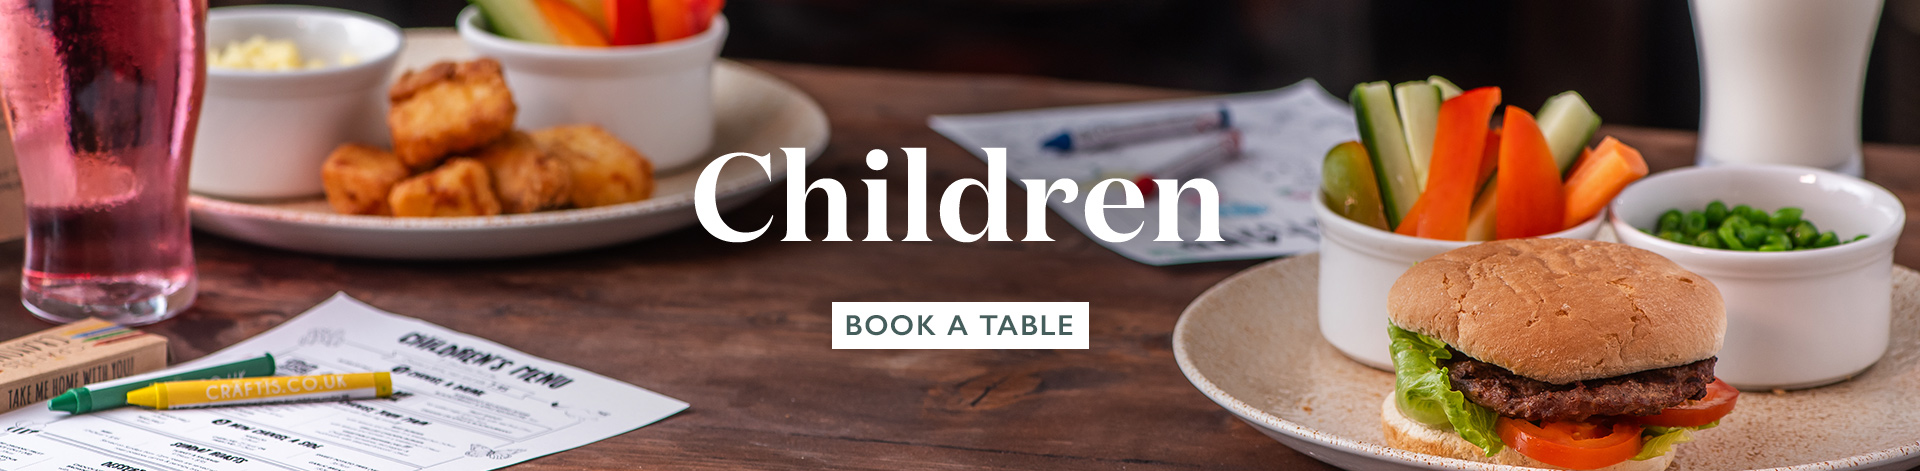 Children's Menu at The Red Lion, Earlswood